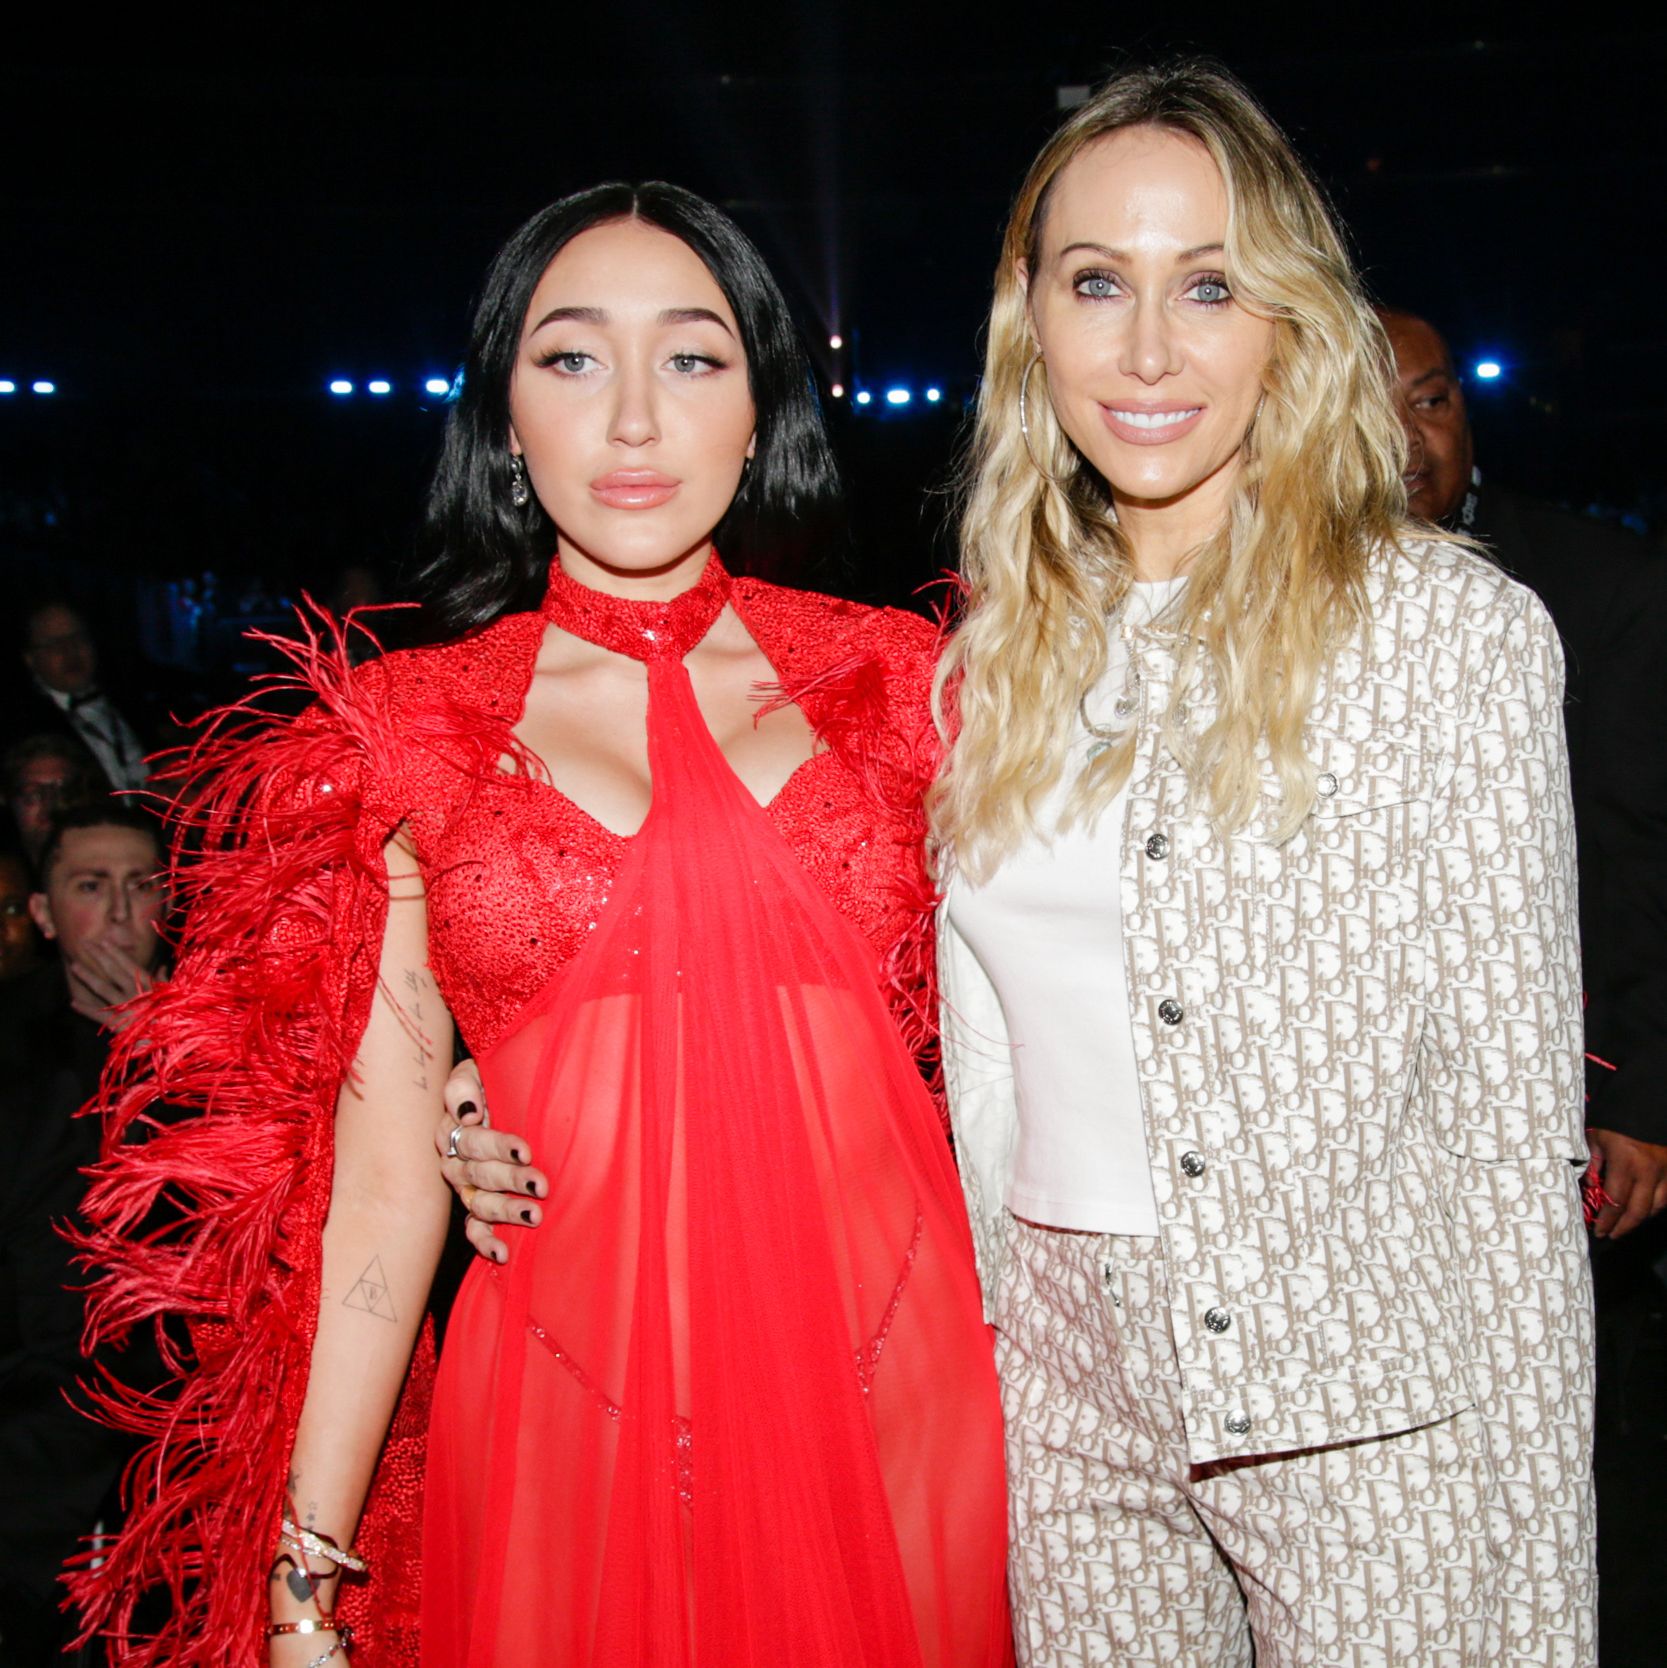 An 'Us Weekly' Source Revealed the Wildest Drama Between Tish Cyrus and Noah Cyrus